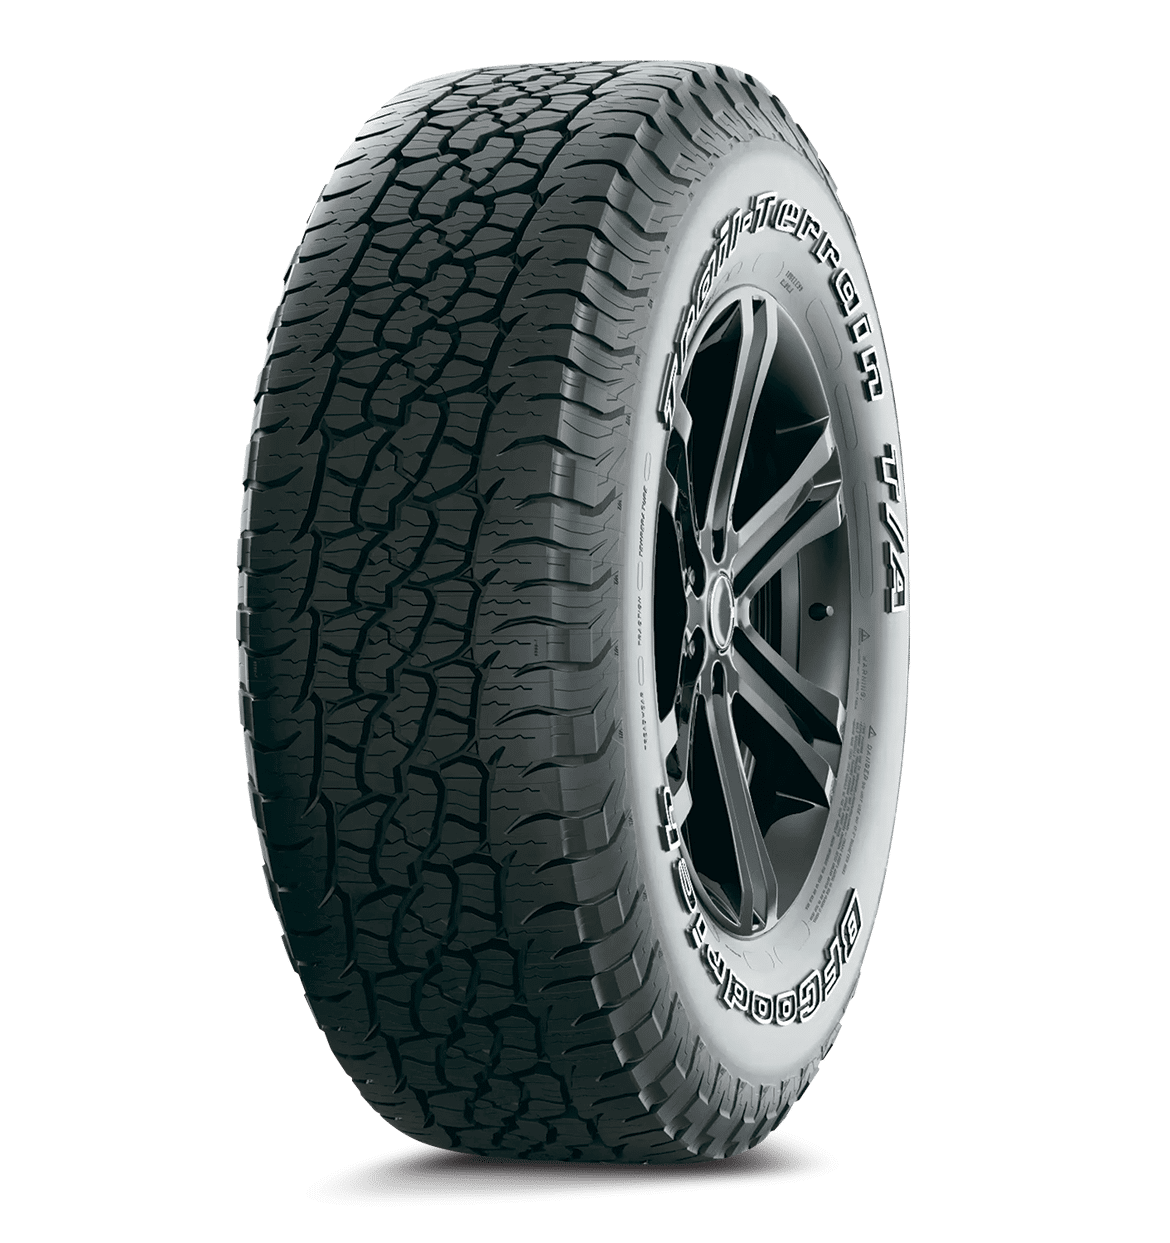 Ford Bronco Some new choices for less aggressive A/T tires CE0581CC-6171-43C5-8837-90F9CB35A7BA